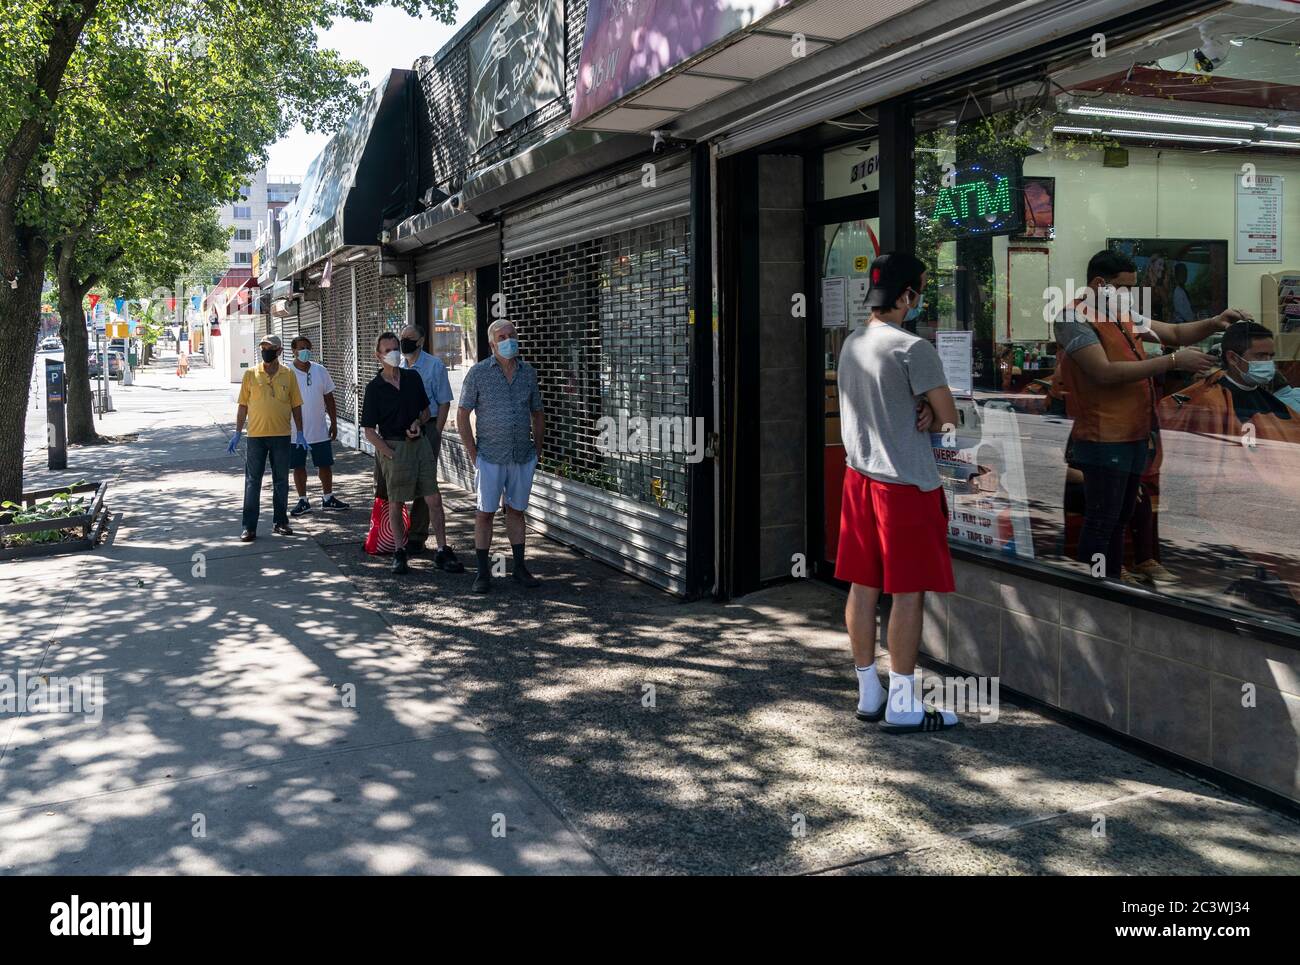 New York, NY - June 22, 2020: Barbershops in the Bronx started to serve customers and perform haircuts as New York City enters phase 2 of reopening Stock Photo